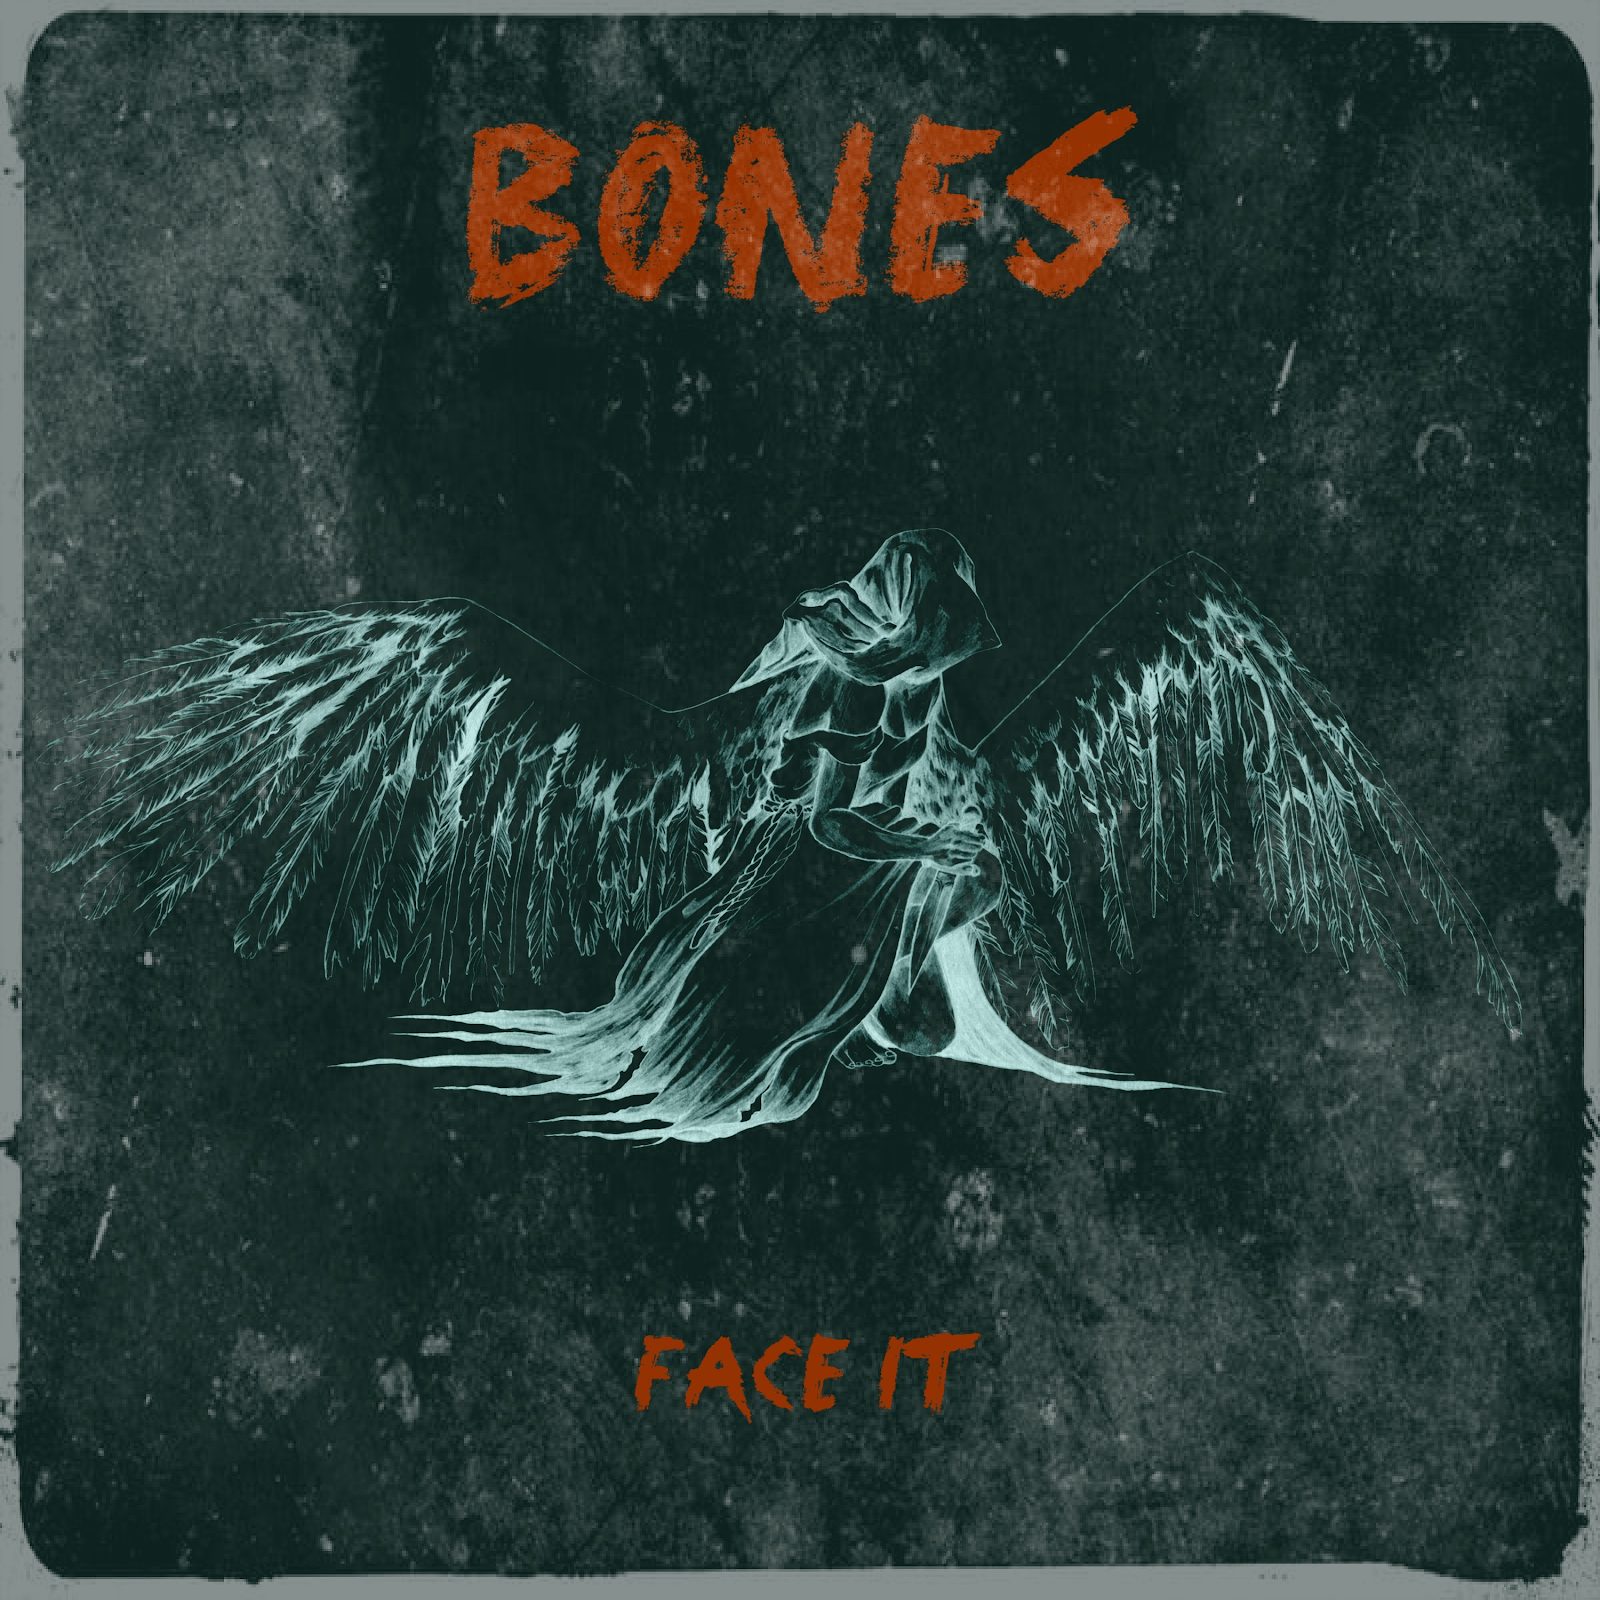 Bones Debuts His Solo Career With “Face It”